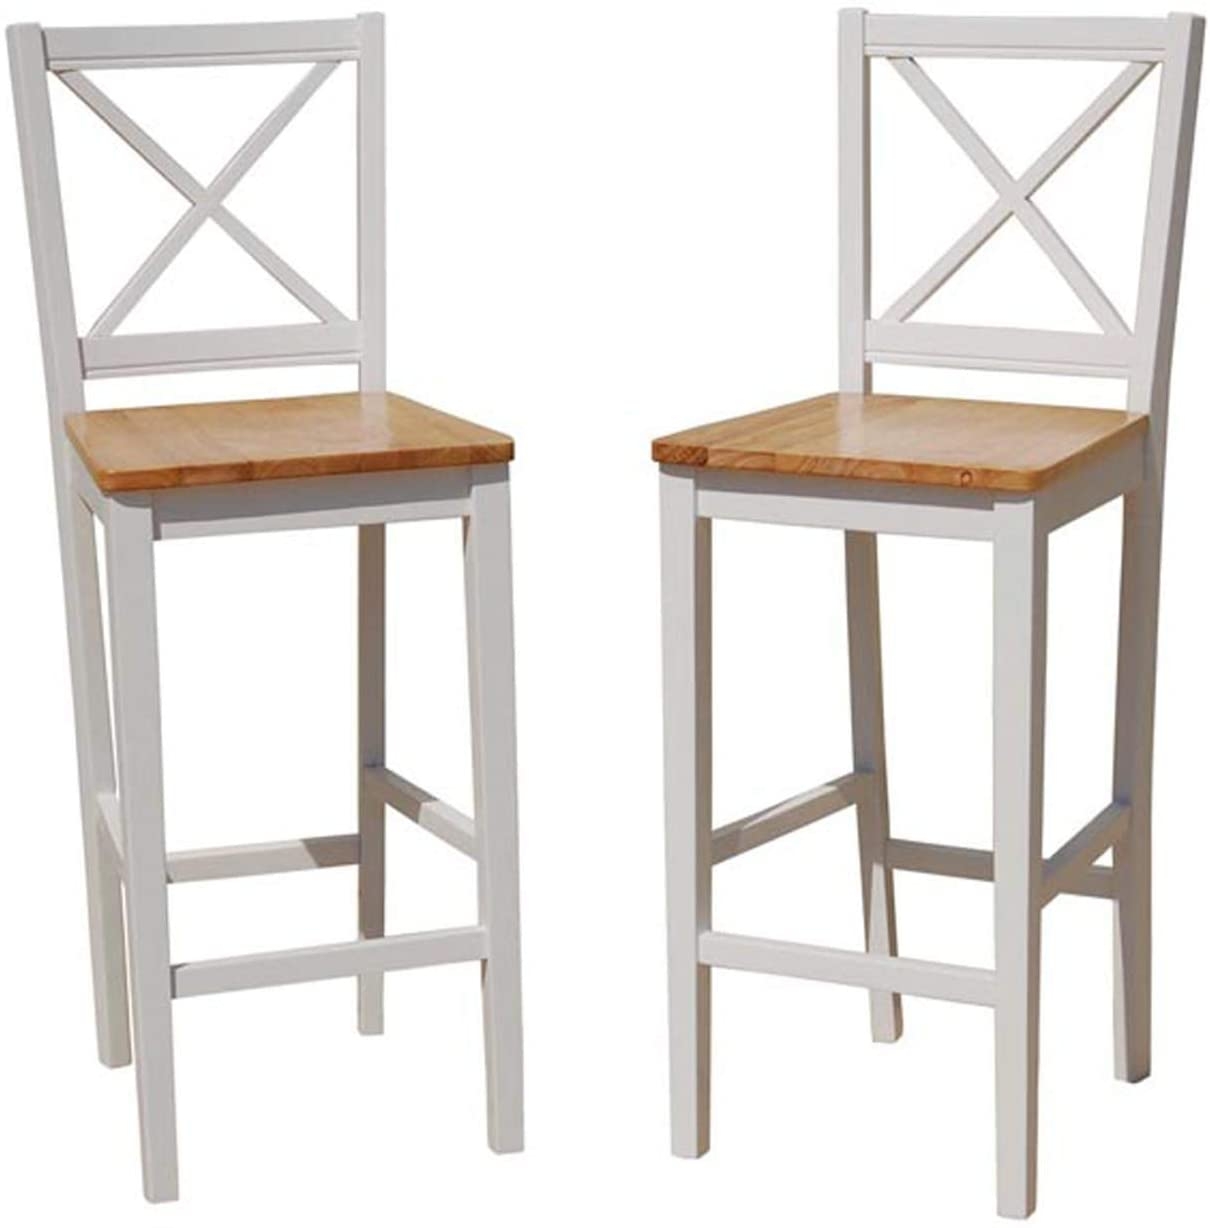 TMS 30 inch Virginia Cross Back Stools (Set of 2), White/natural